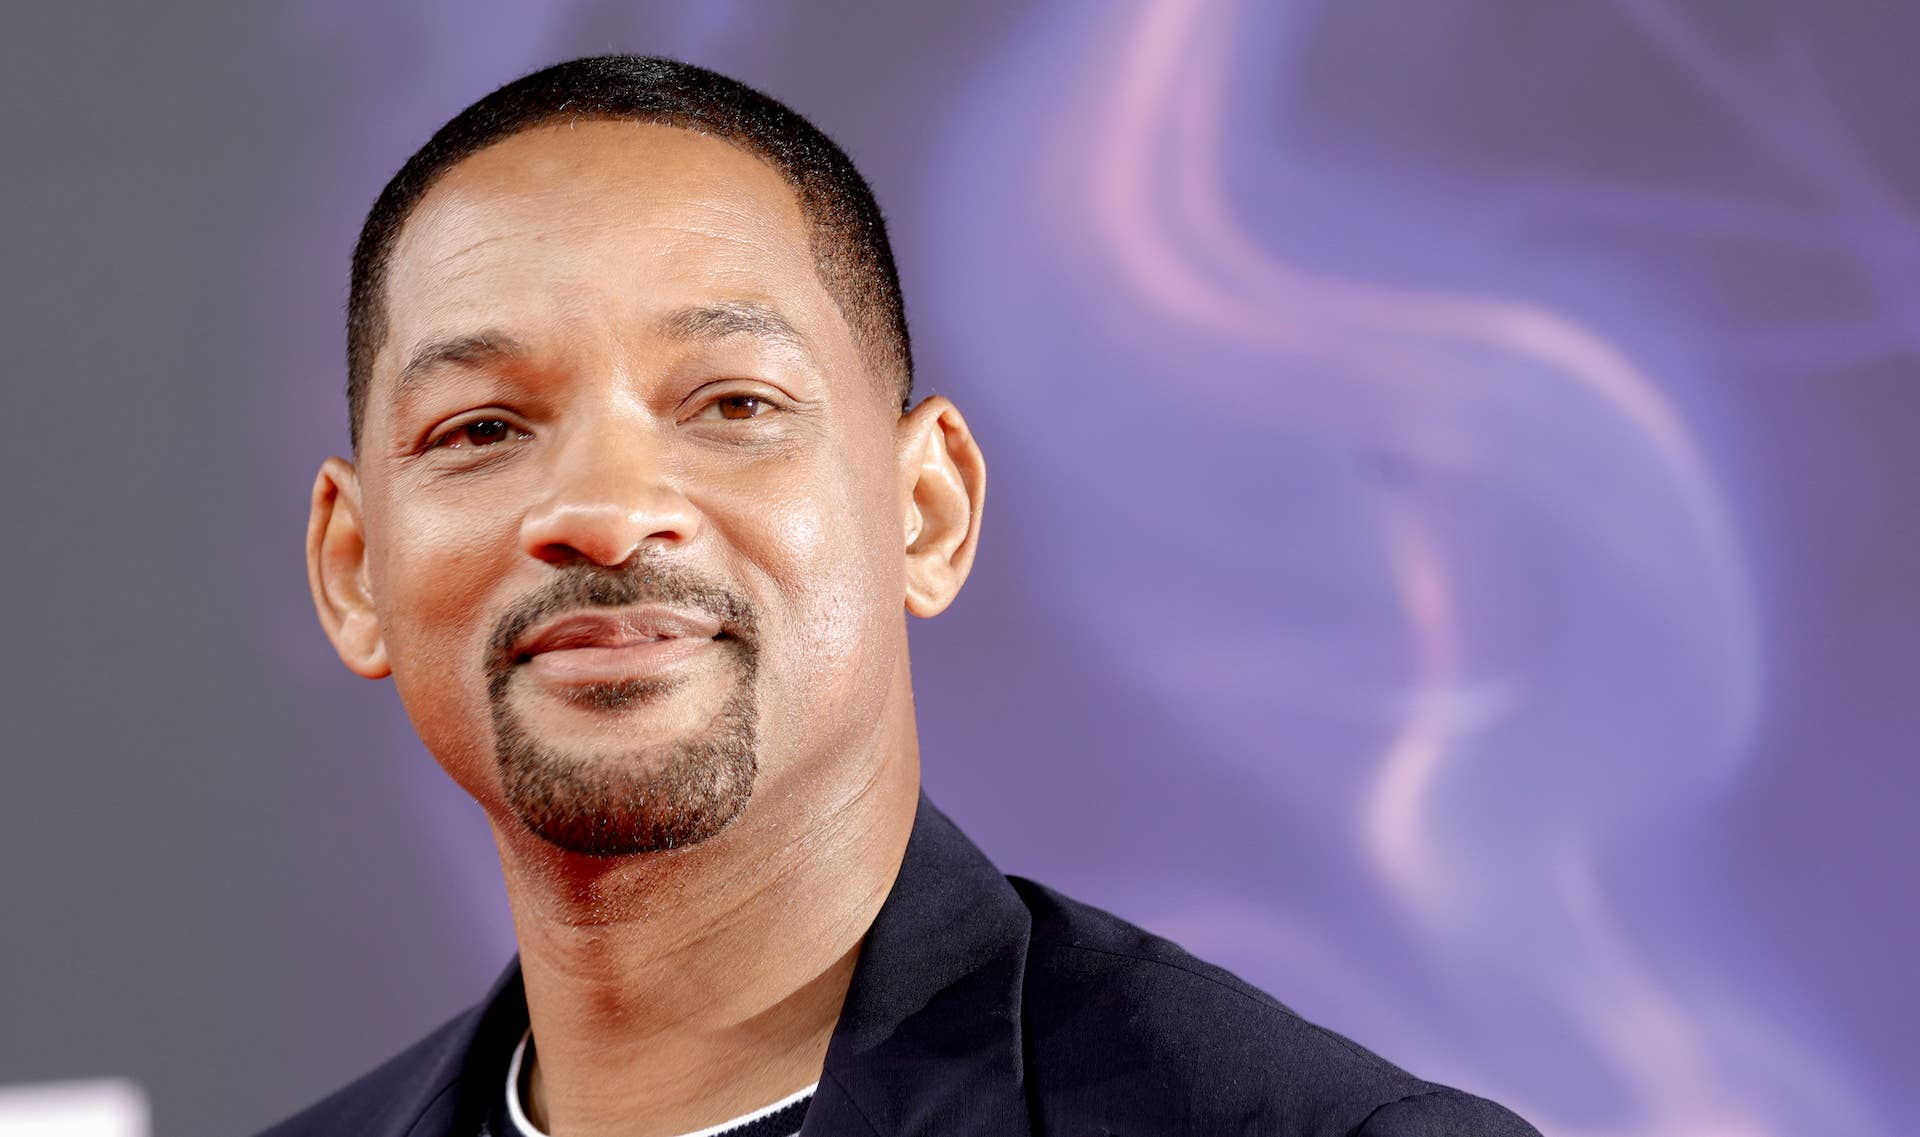 Will Smith on red carpet for 'Aladdin' premiere